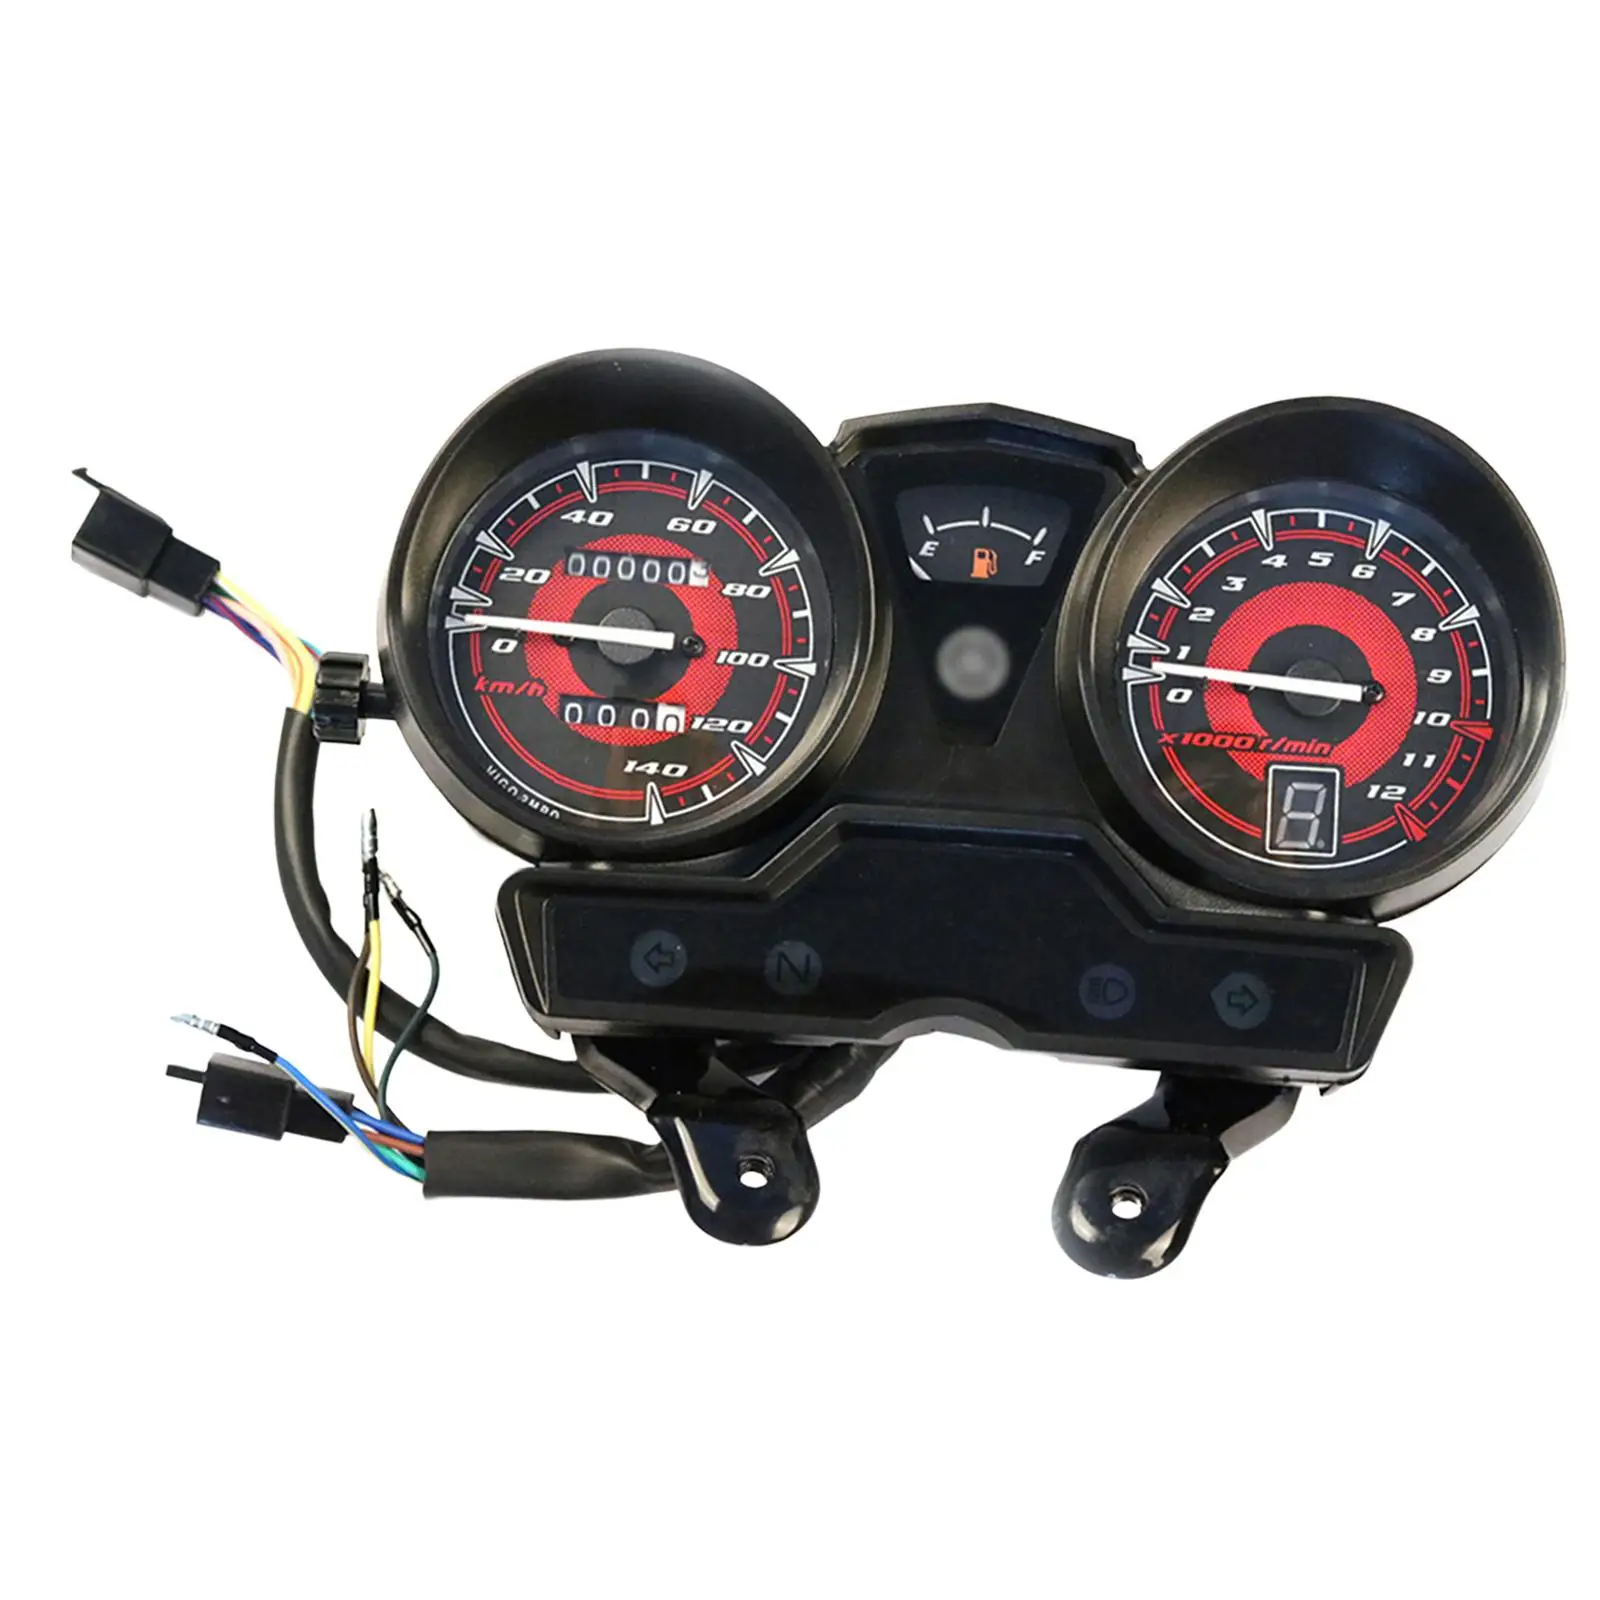 Motorbike LED Digital Speedometer for Yamaha Jym125 Replacement Durable